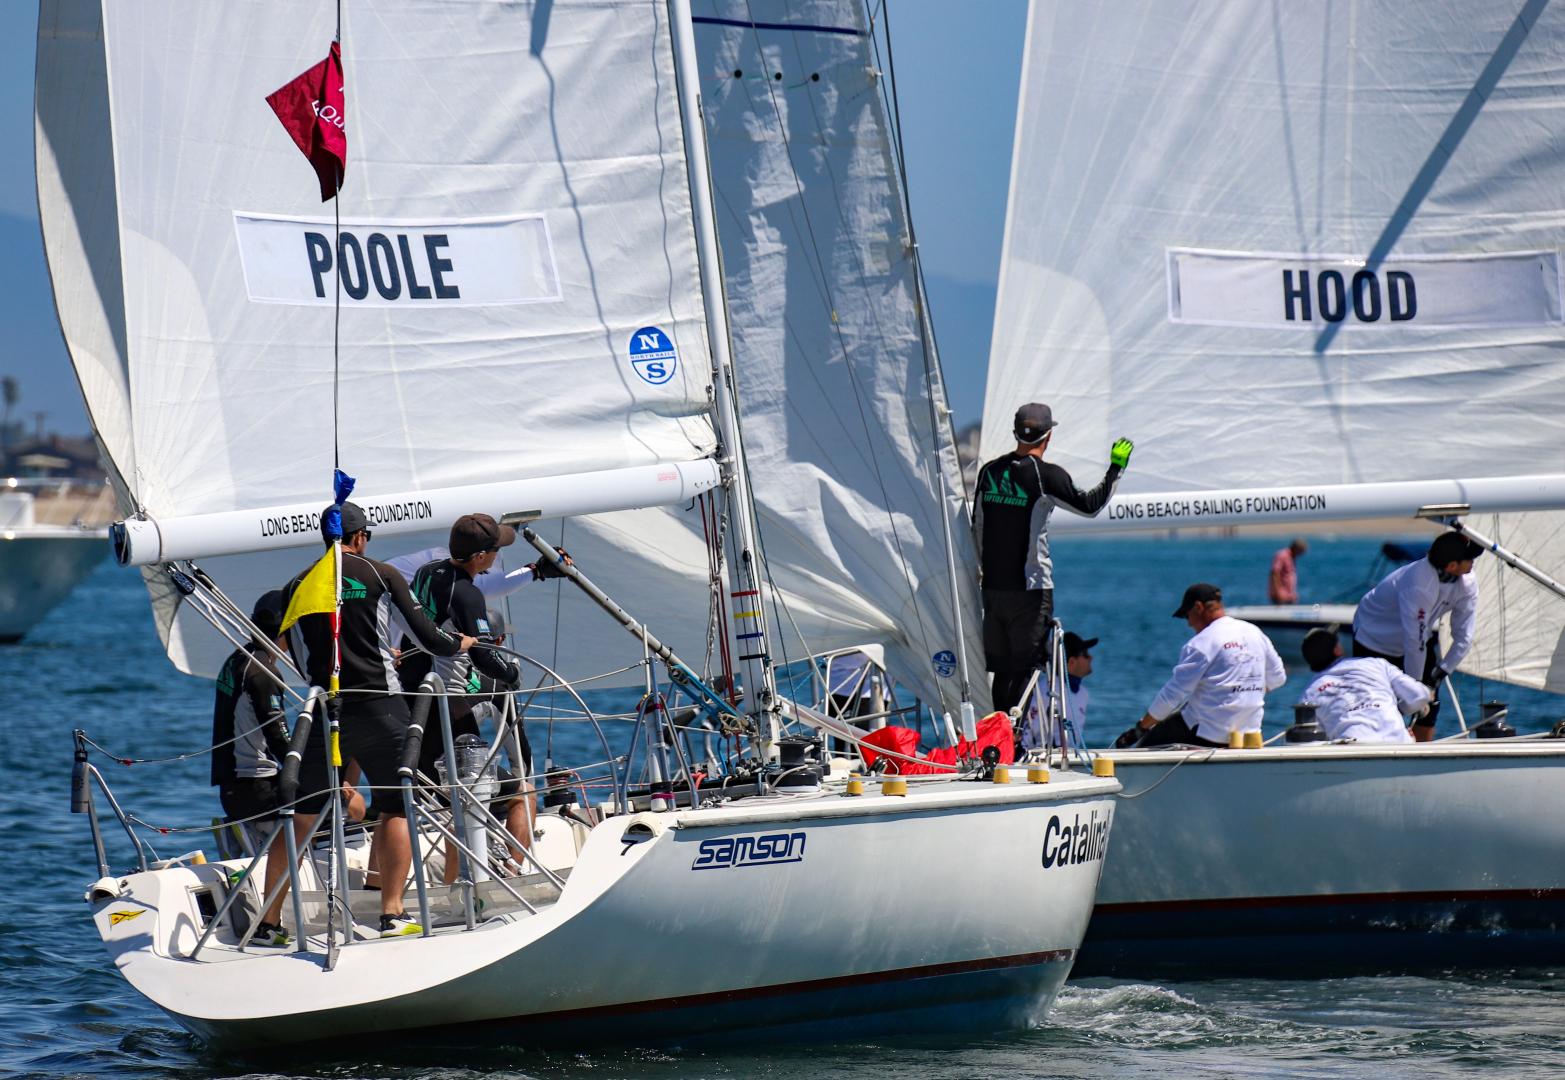 Price & Poole advance to Congressional Cup April 3-7